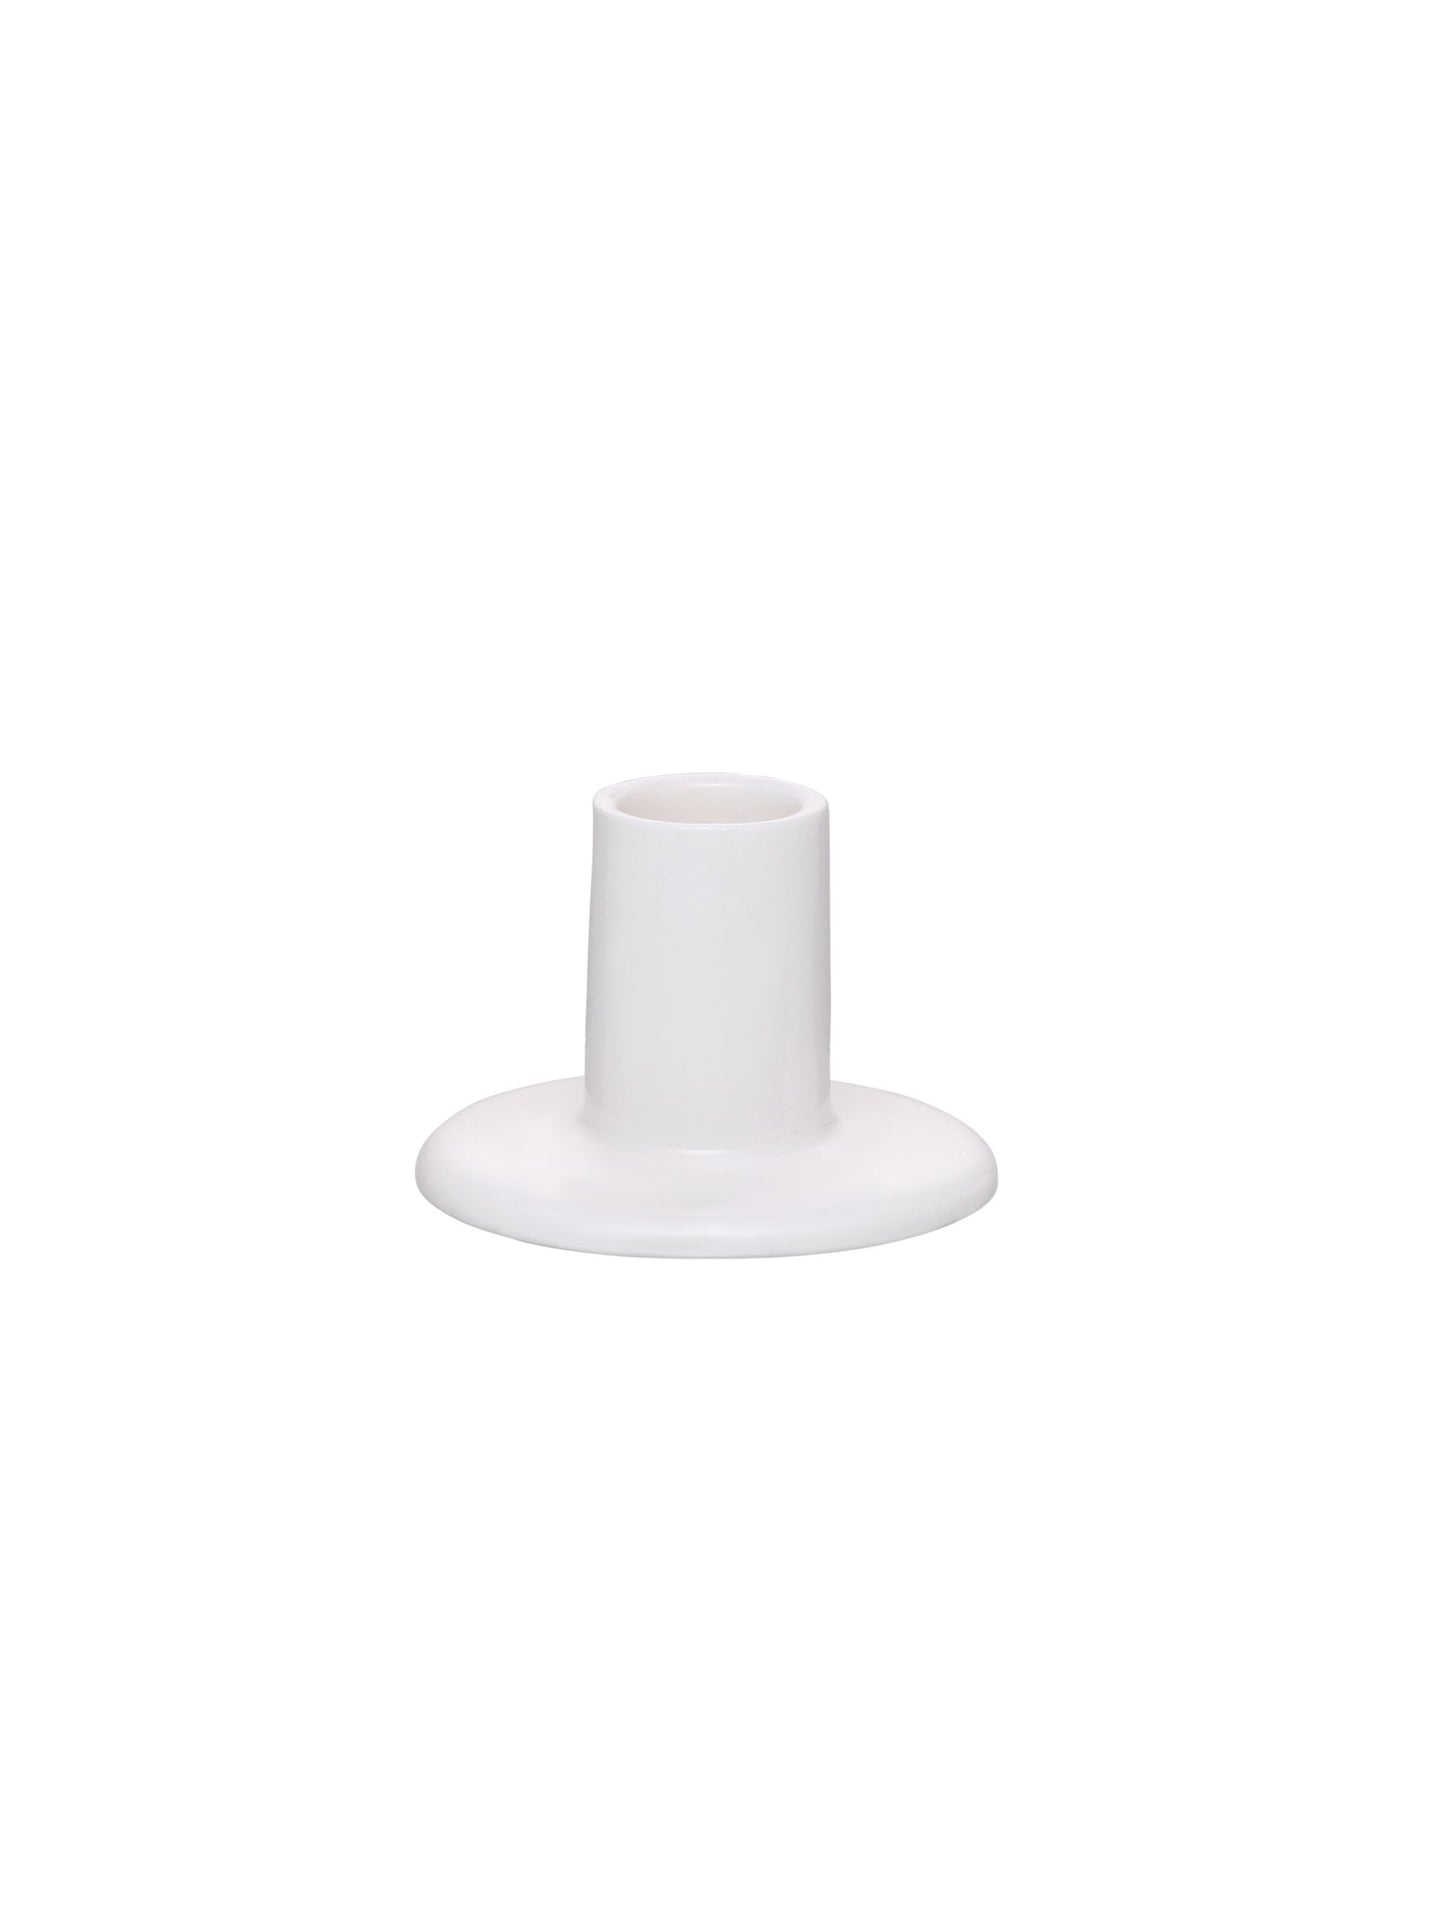 Clay Craft Basic Candle Stand 1 Piece Plain White - Clay Craft India